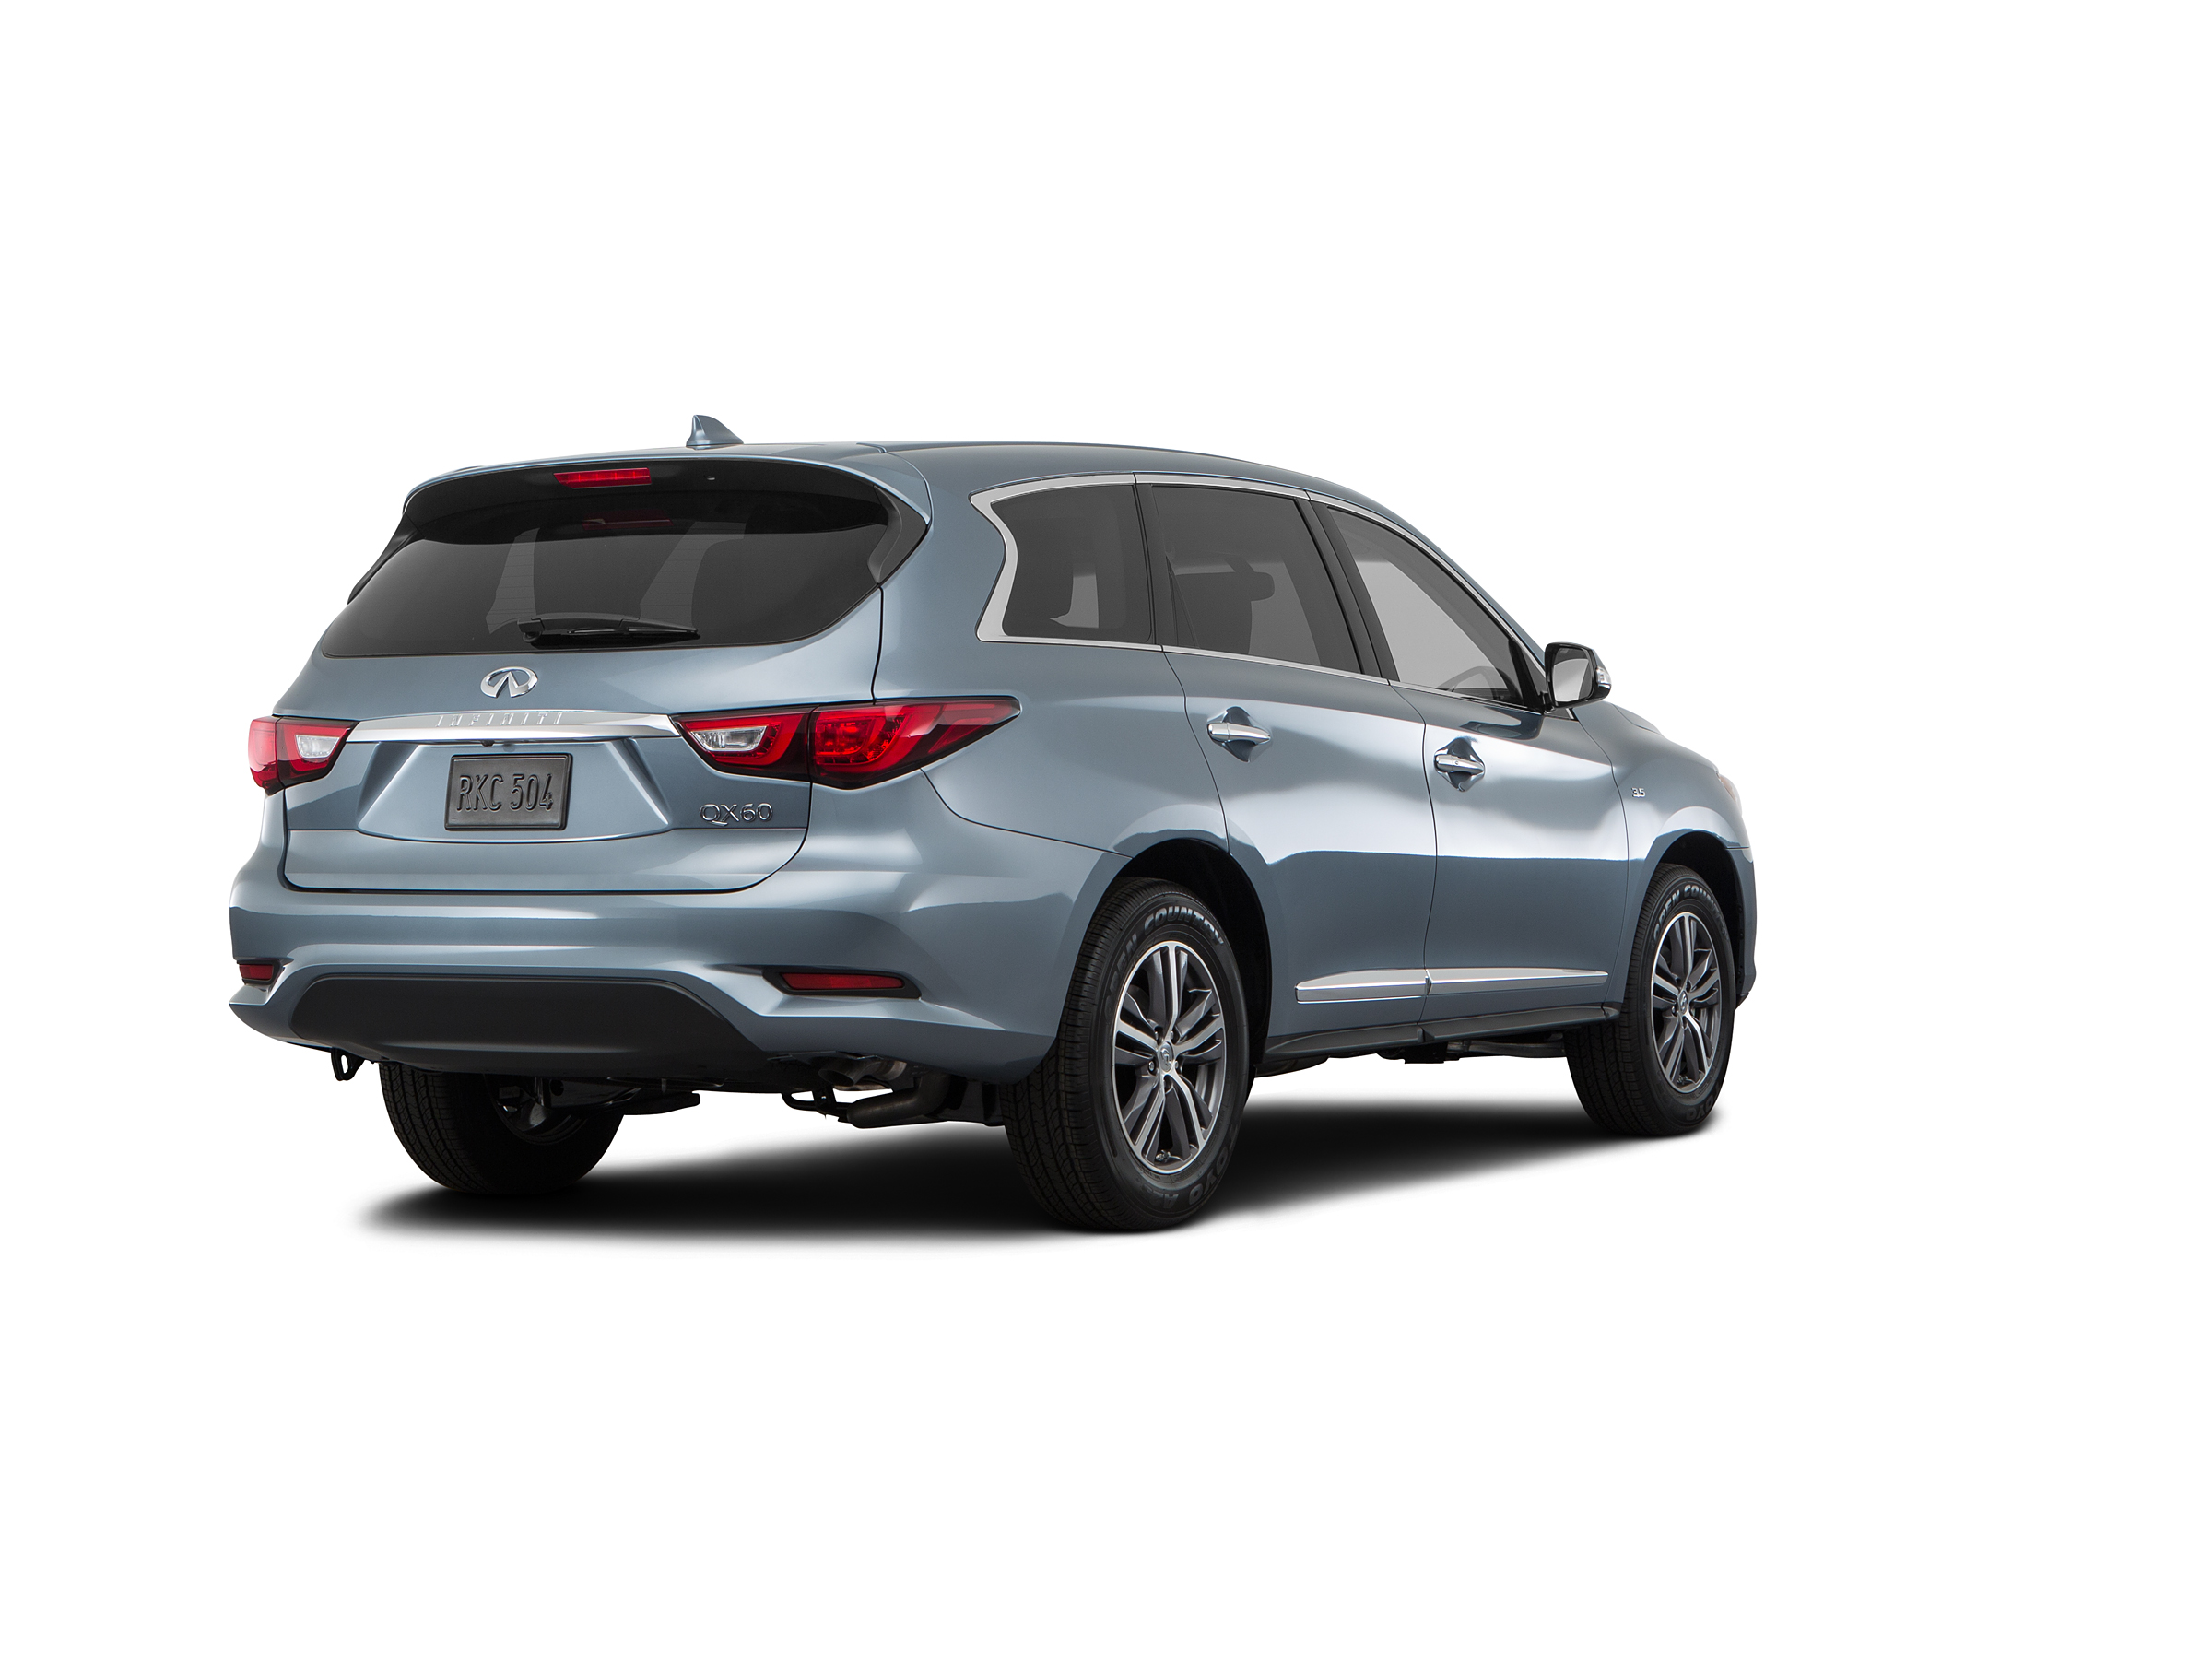 If you want to purchase a quality used INFINITI QX60 in Charlotte, NC, then Lake Norman INFINITI is the first place to visit.